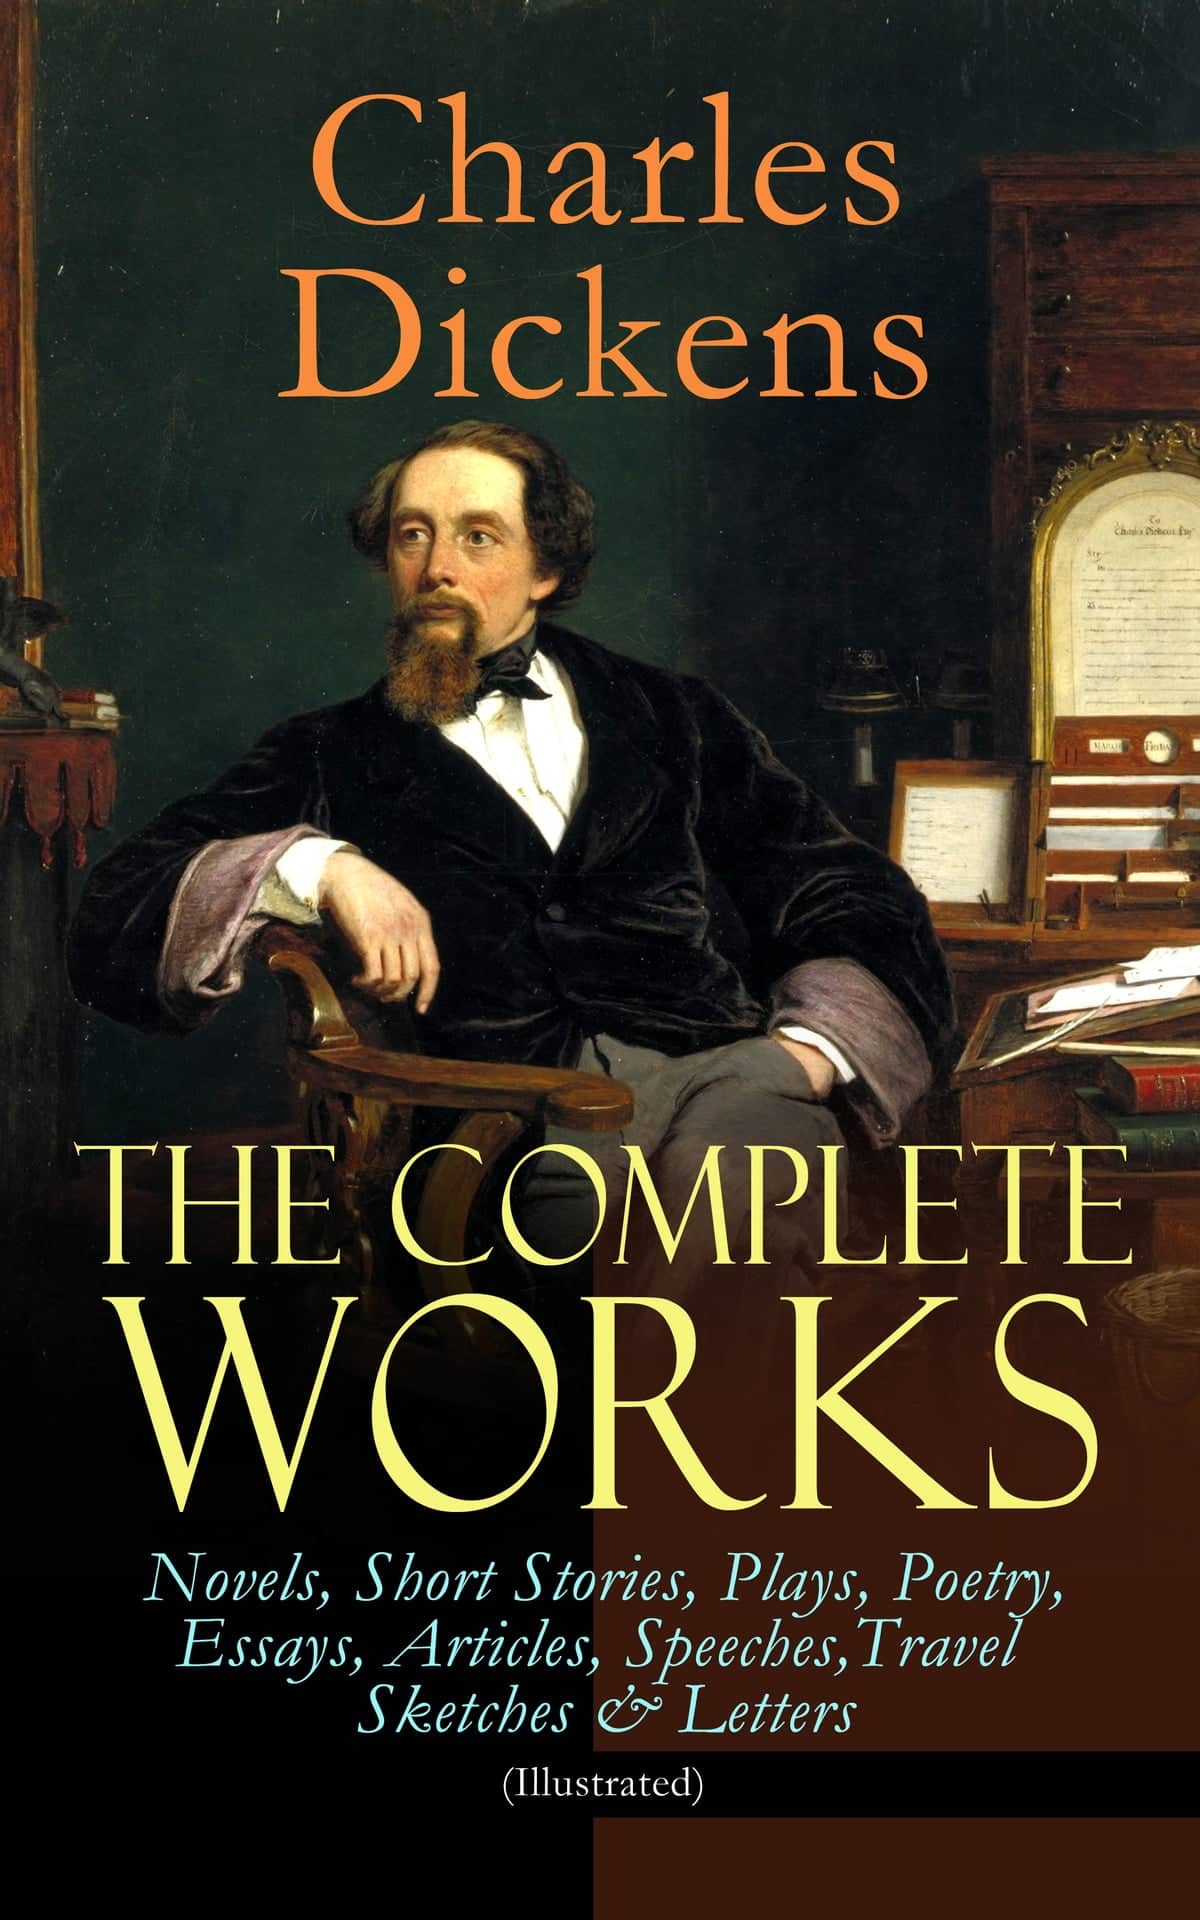 All about Charles Dickens's works